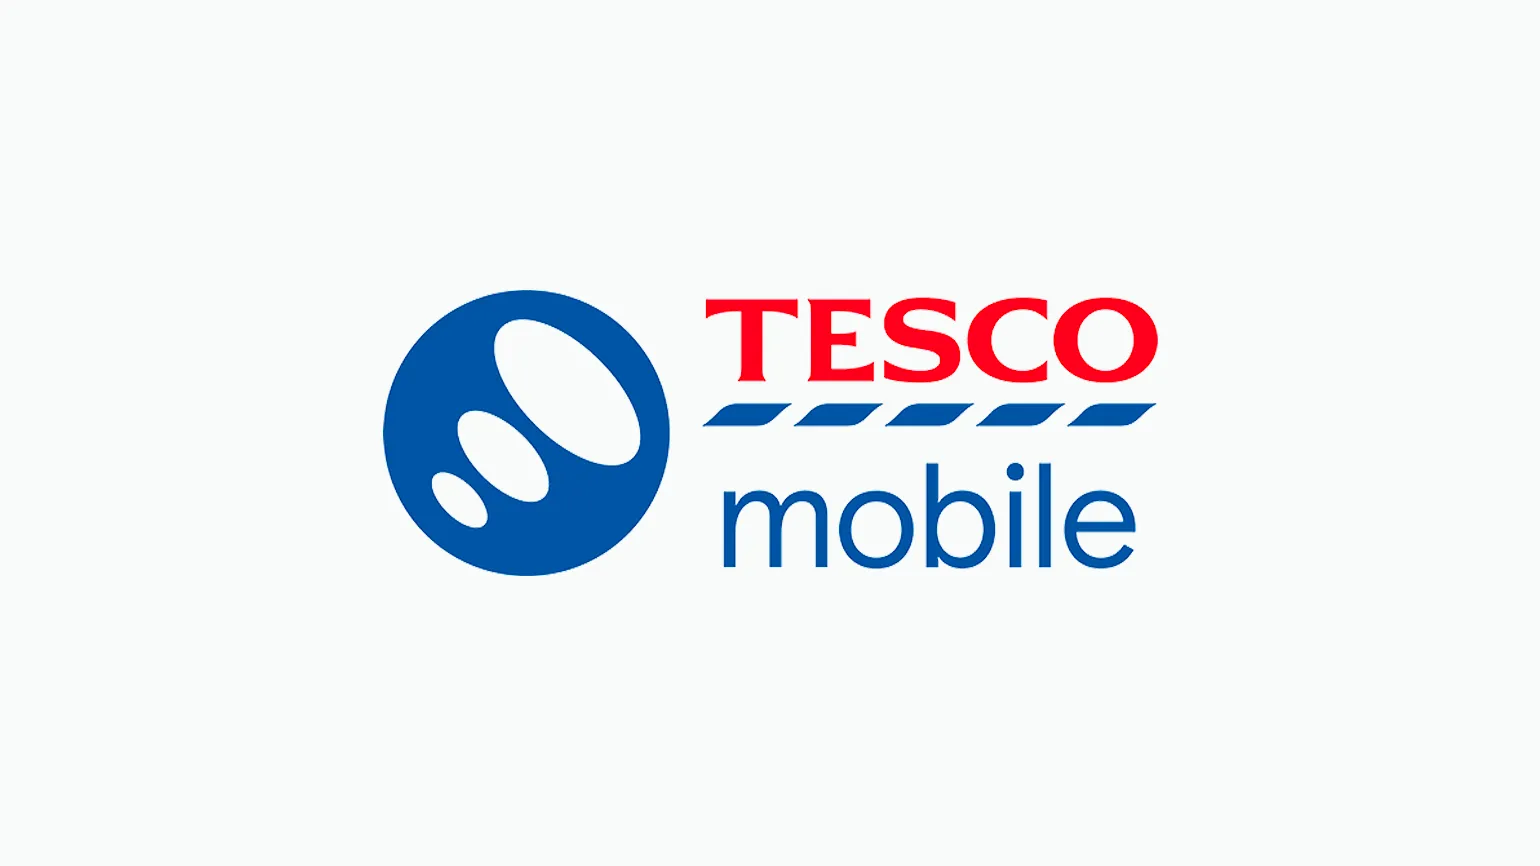 Upgrading your phone early with Tesco Mobile